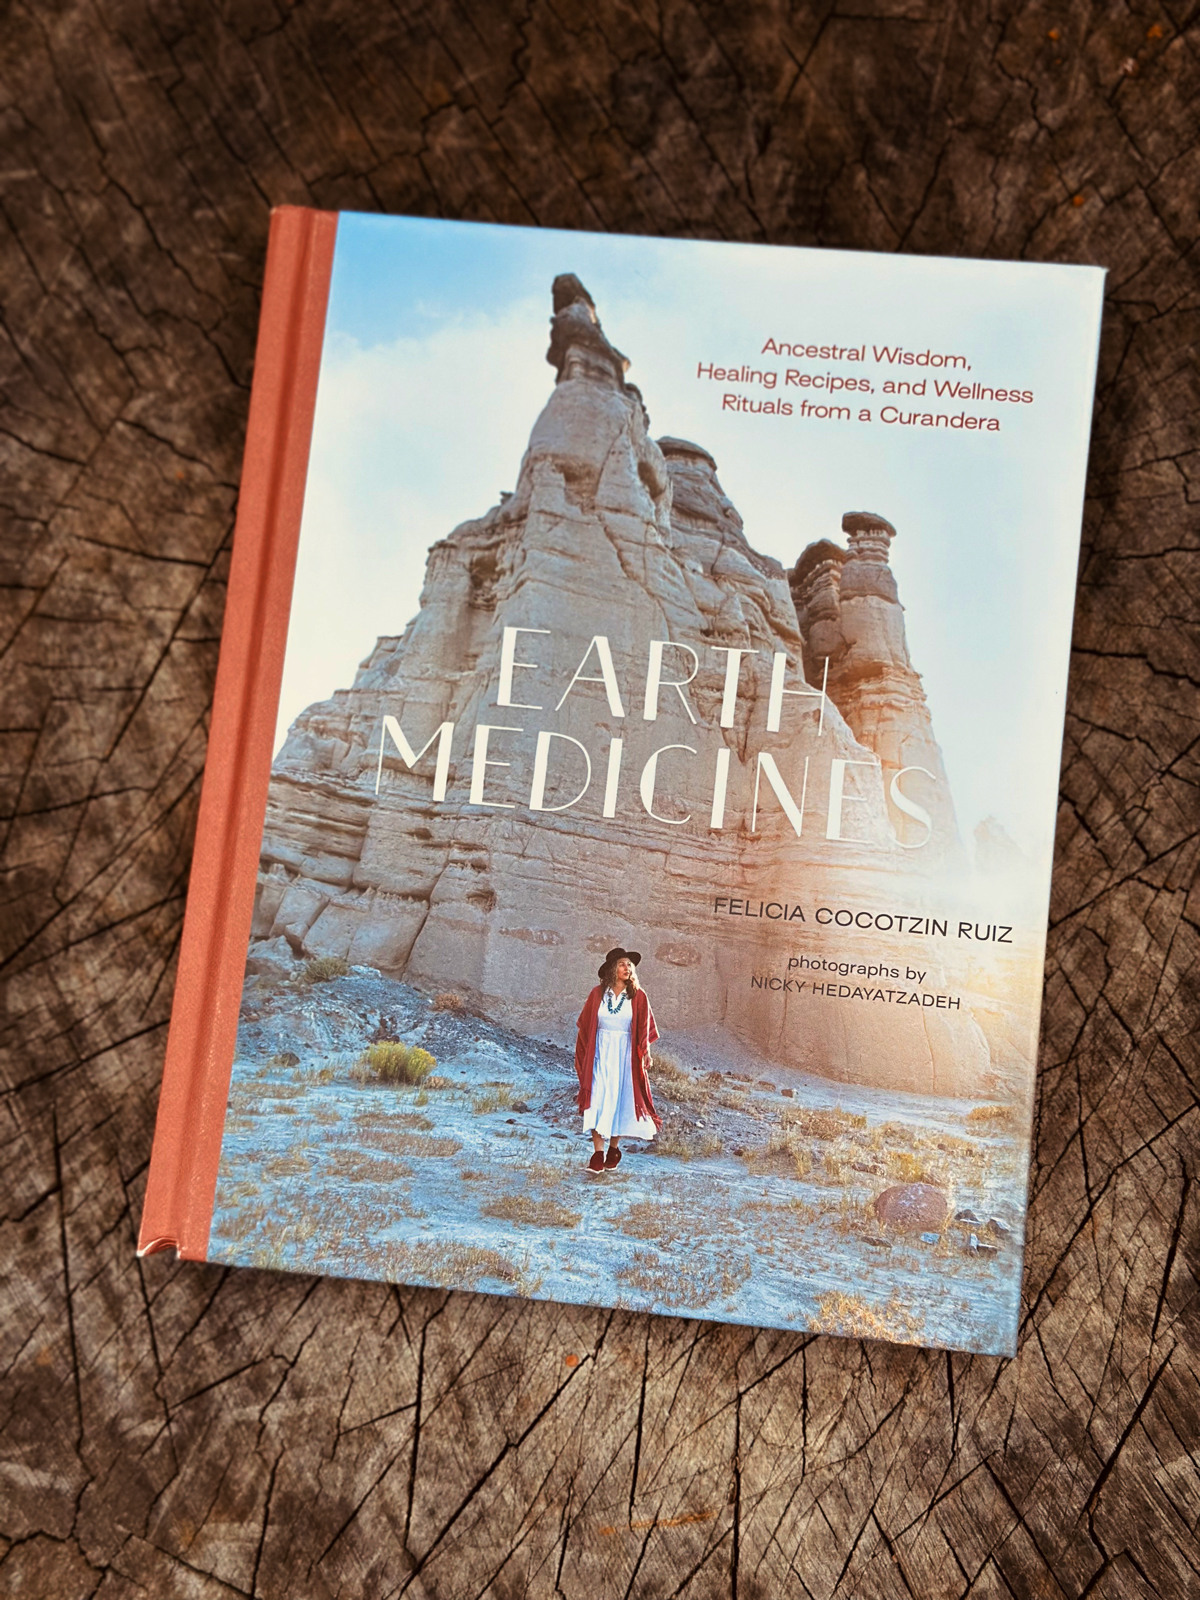 Earth Medicines: Ancestral Wisdom, Healing Recipes, and Wellness Rituals from a Curandera by Felicia Cocotzin Ruiz is one of the top home herbal apothecary books.